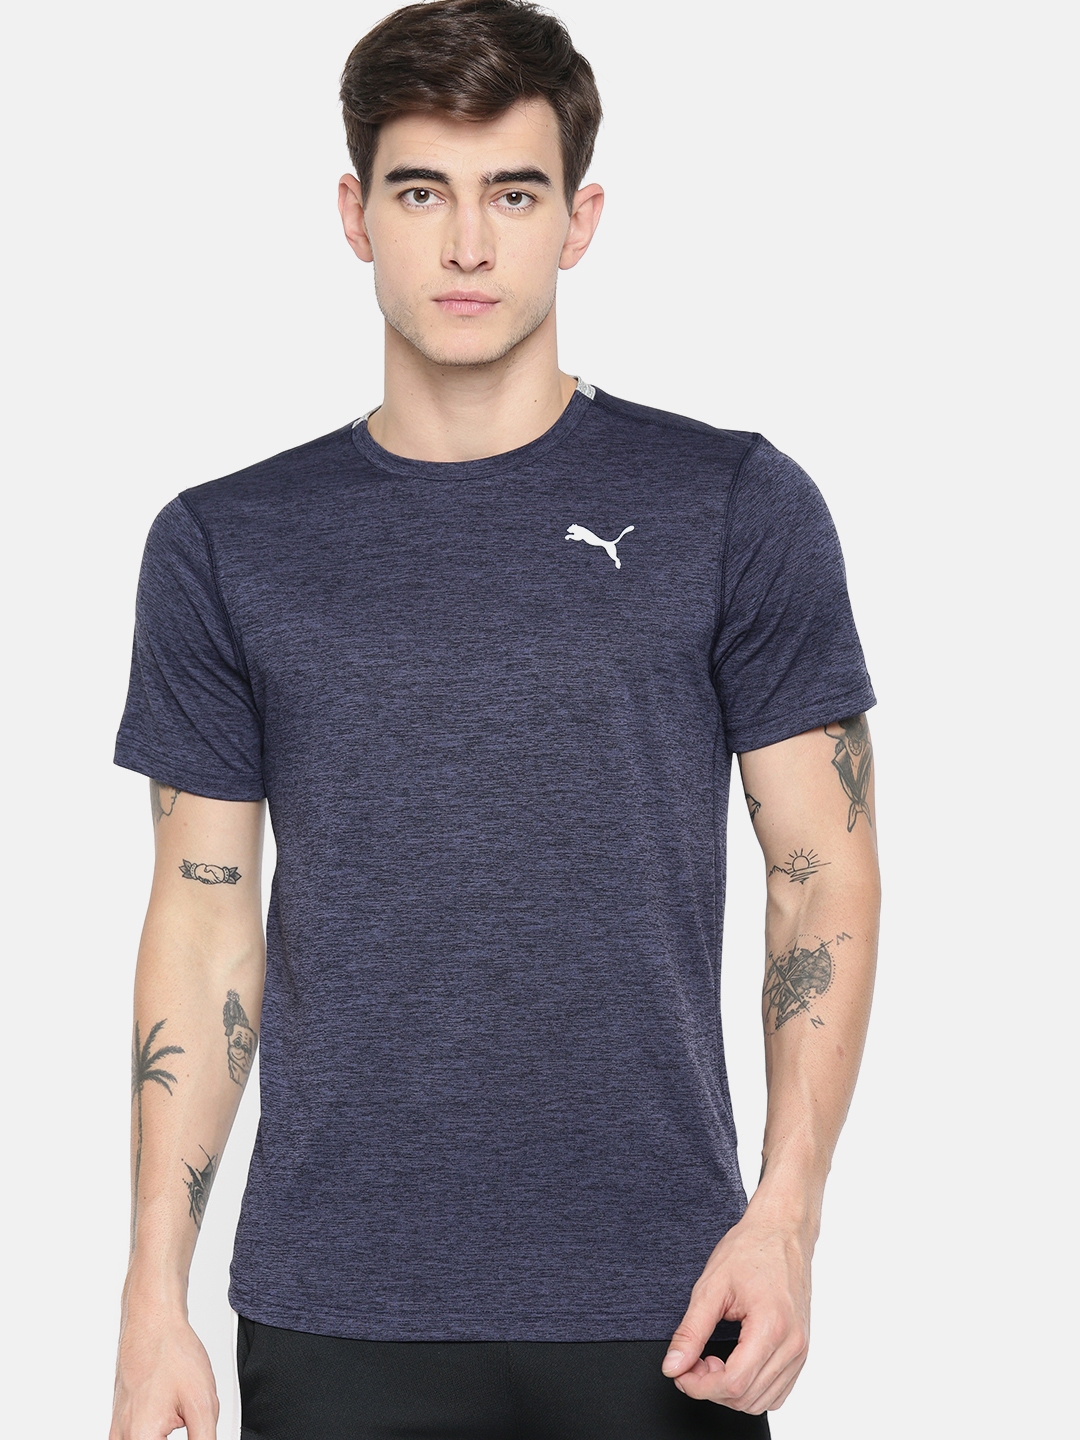 Buy Puma Men Navy Blue Solid DRYCELL Ignite Heather Round Neck T Shirt - Tshirts for Men 